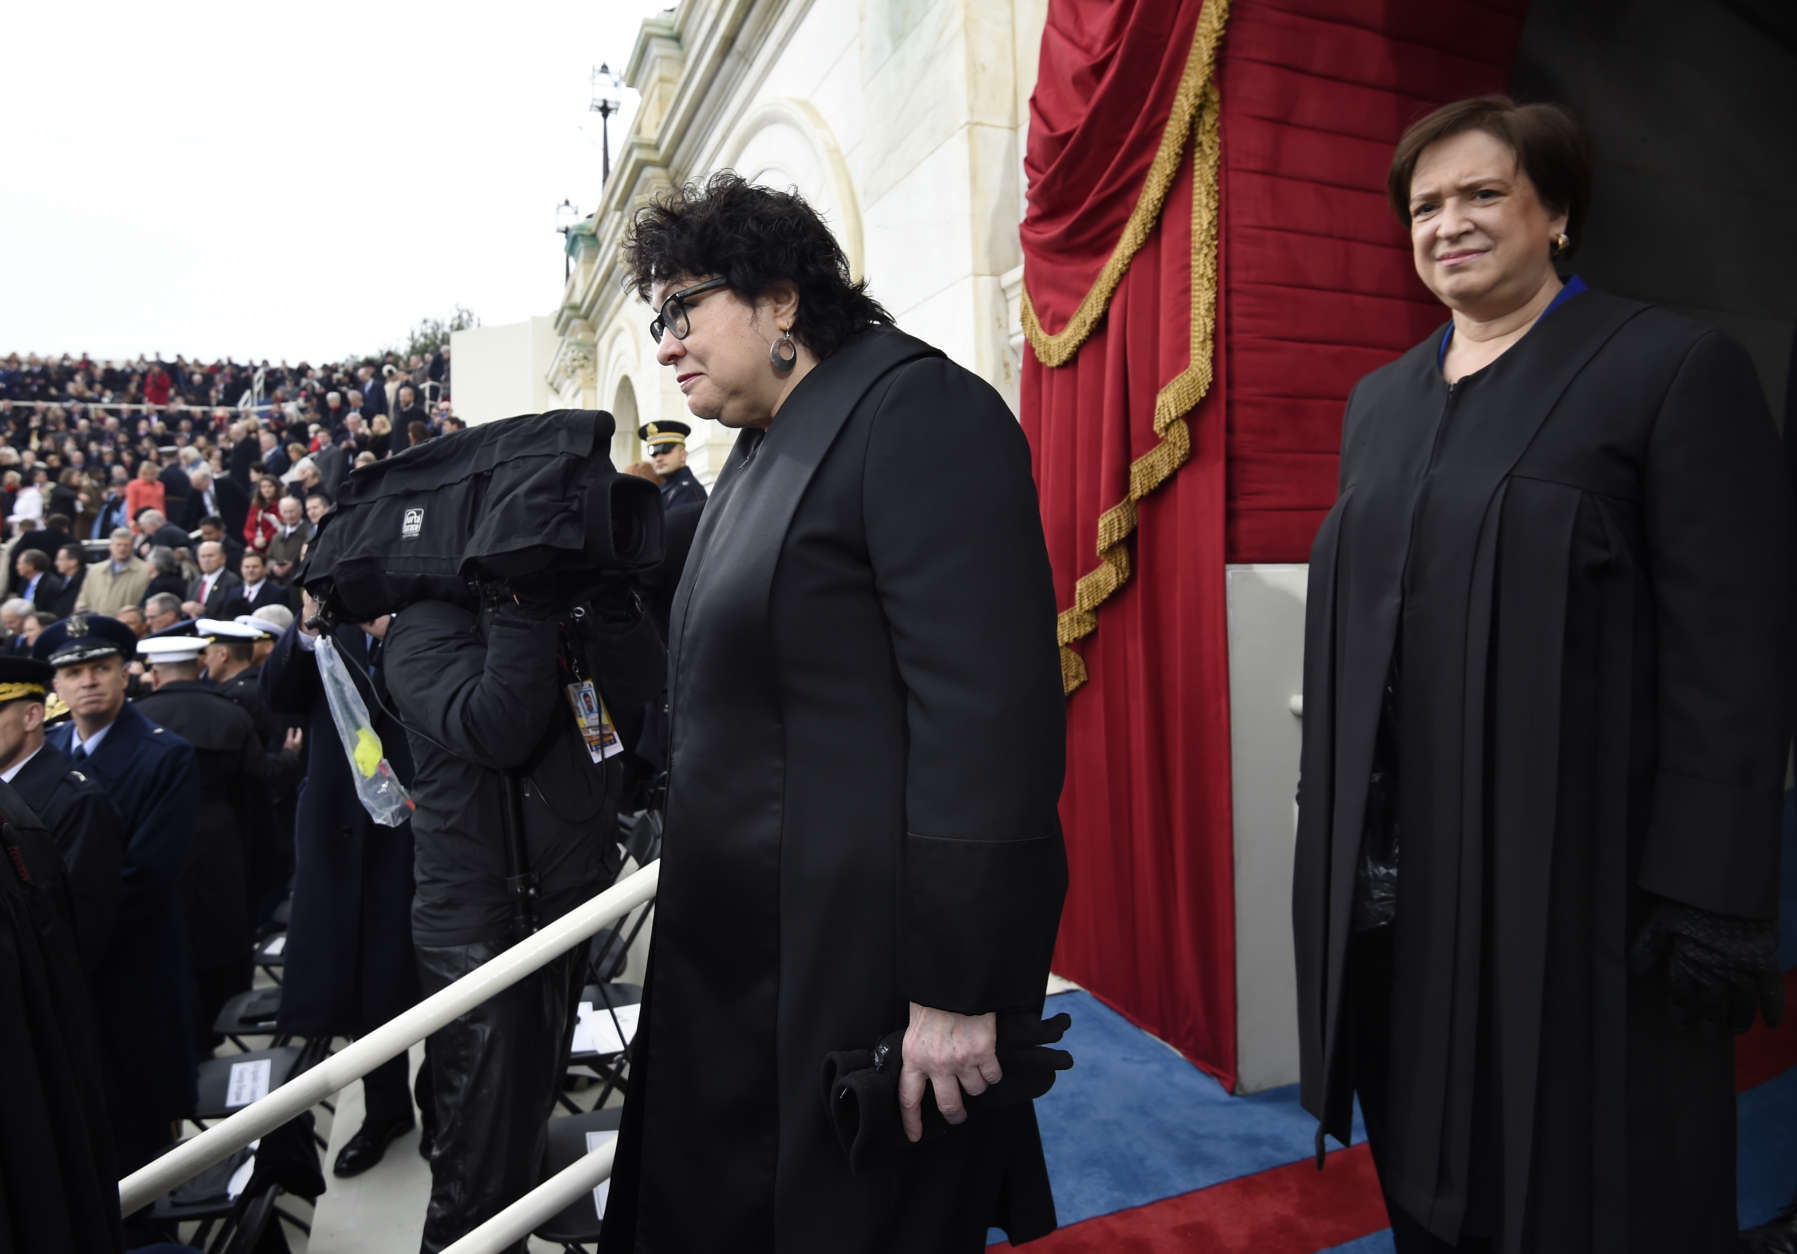 WASHINGTON, DC - JANUARY 20: US Supreme Court Justices Sonia Sotomayor (C) and Elena Kagan arrive for the Presidential Inauguration of Donald Trump at the US Capitol on January 20, 2017 in Washington, DC. Donald J. Trump will become the 45th president of the United States today.  (Photo by Saul Loeb - Pool/Getty Images)